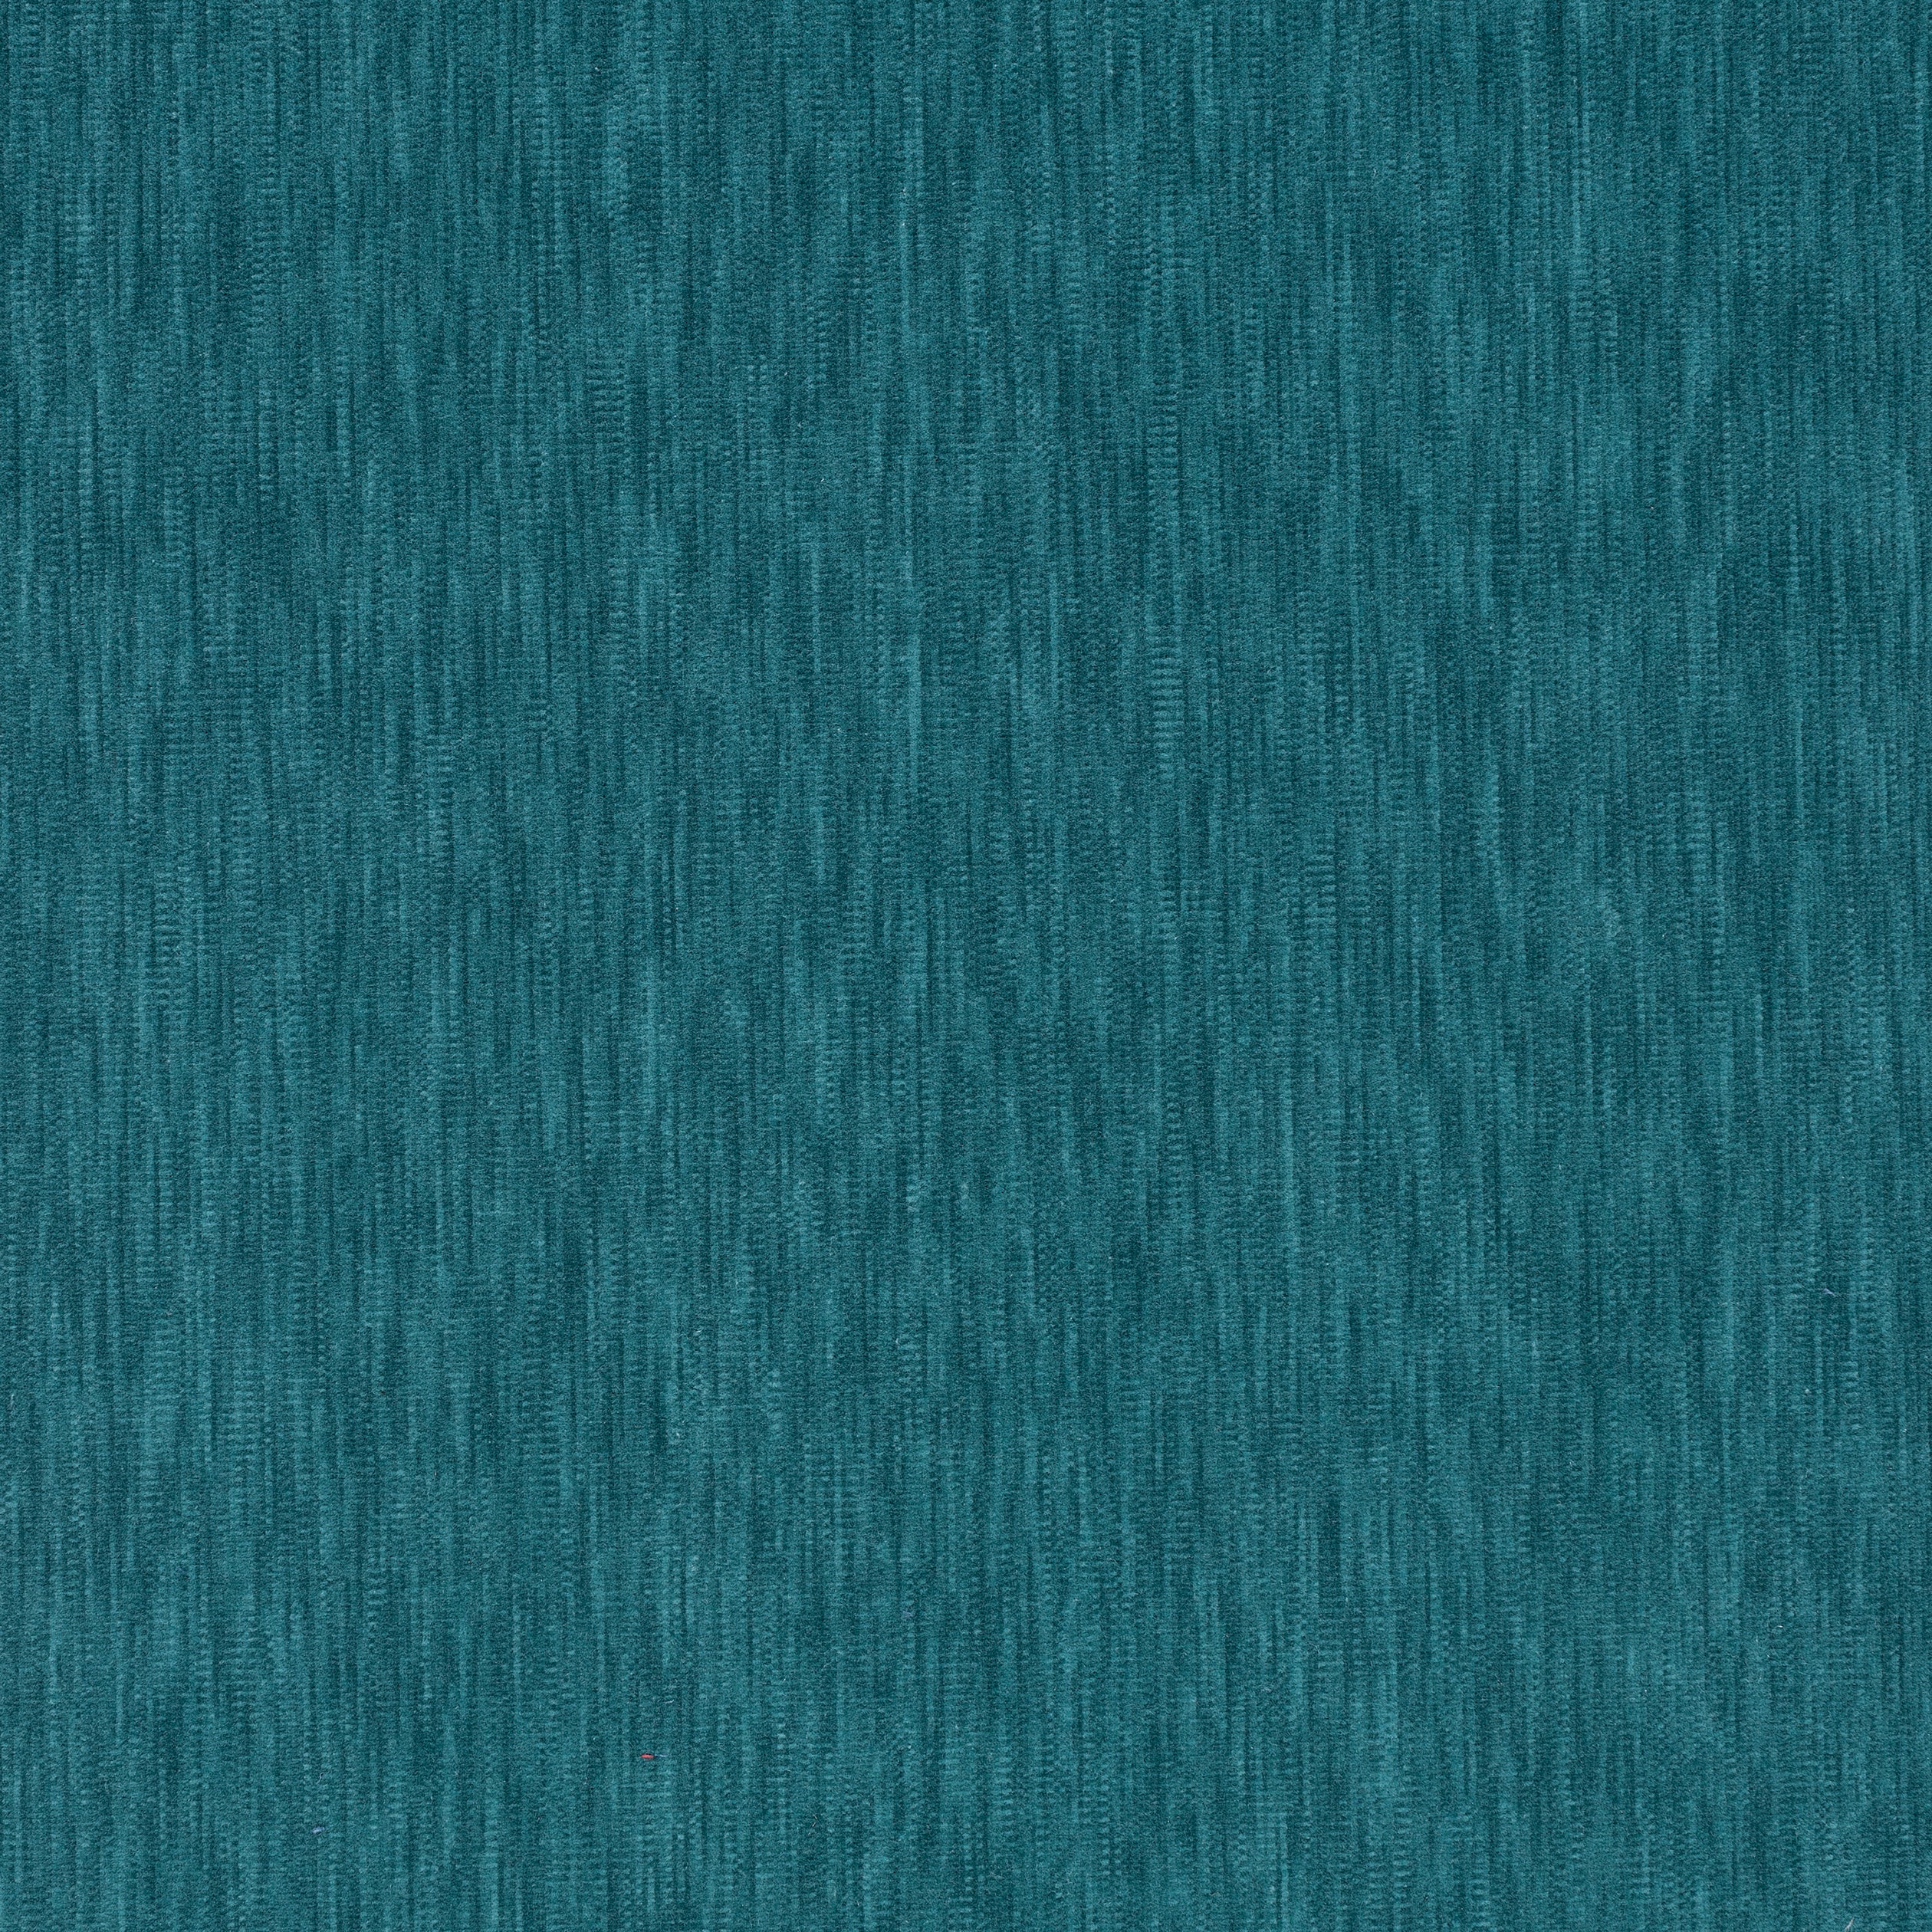 Riff Velvet fabric in teal color - pattern number W72833 - by Thibaut in the Woven Resource 13: Fusion Velvets collection